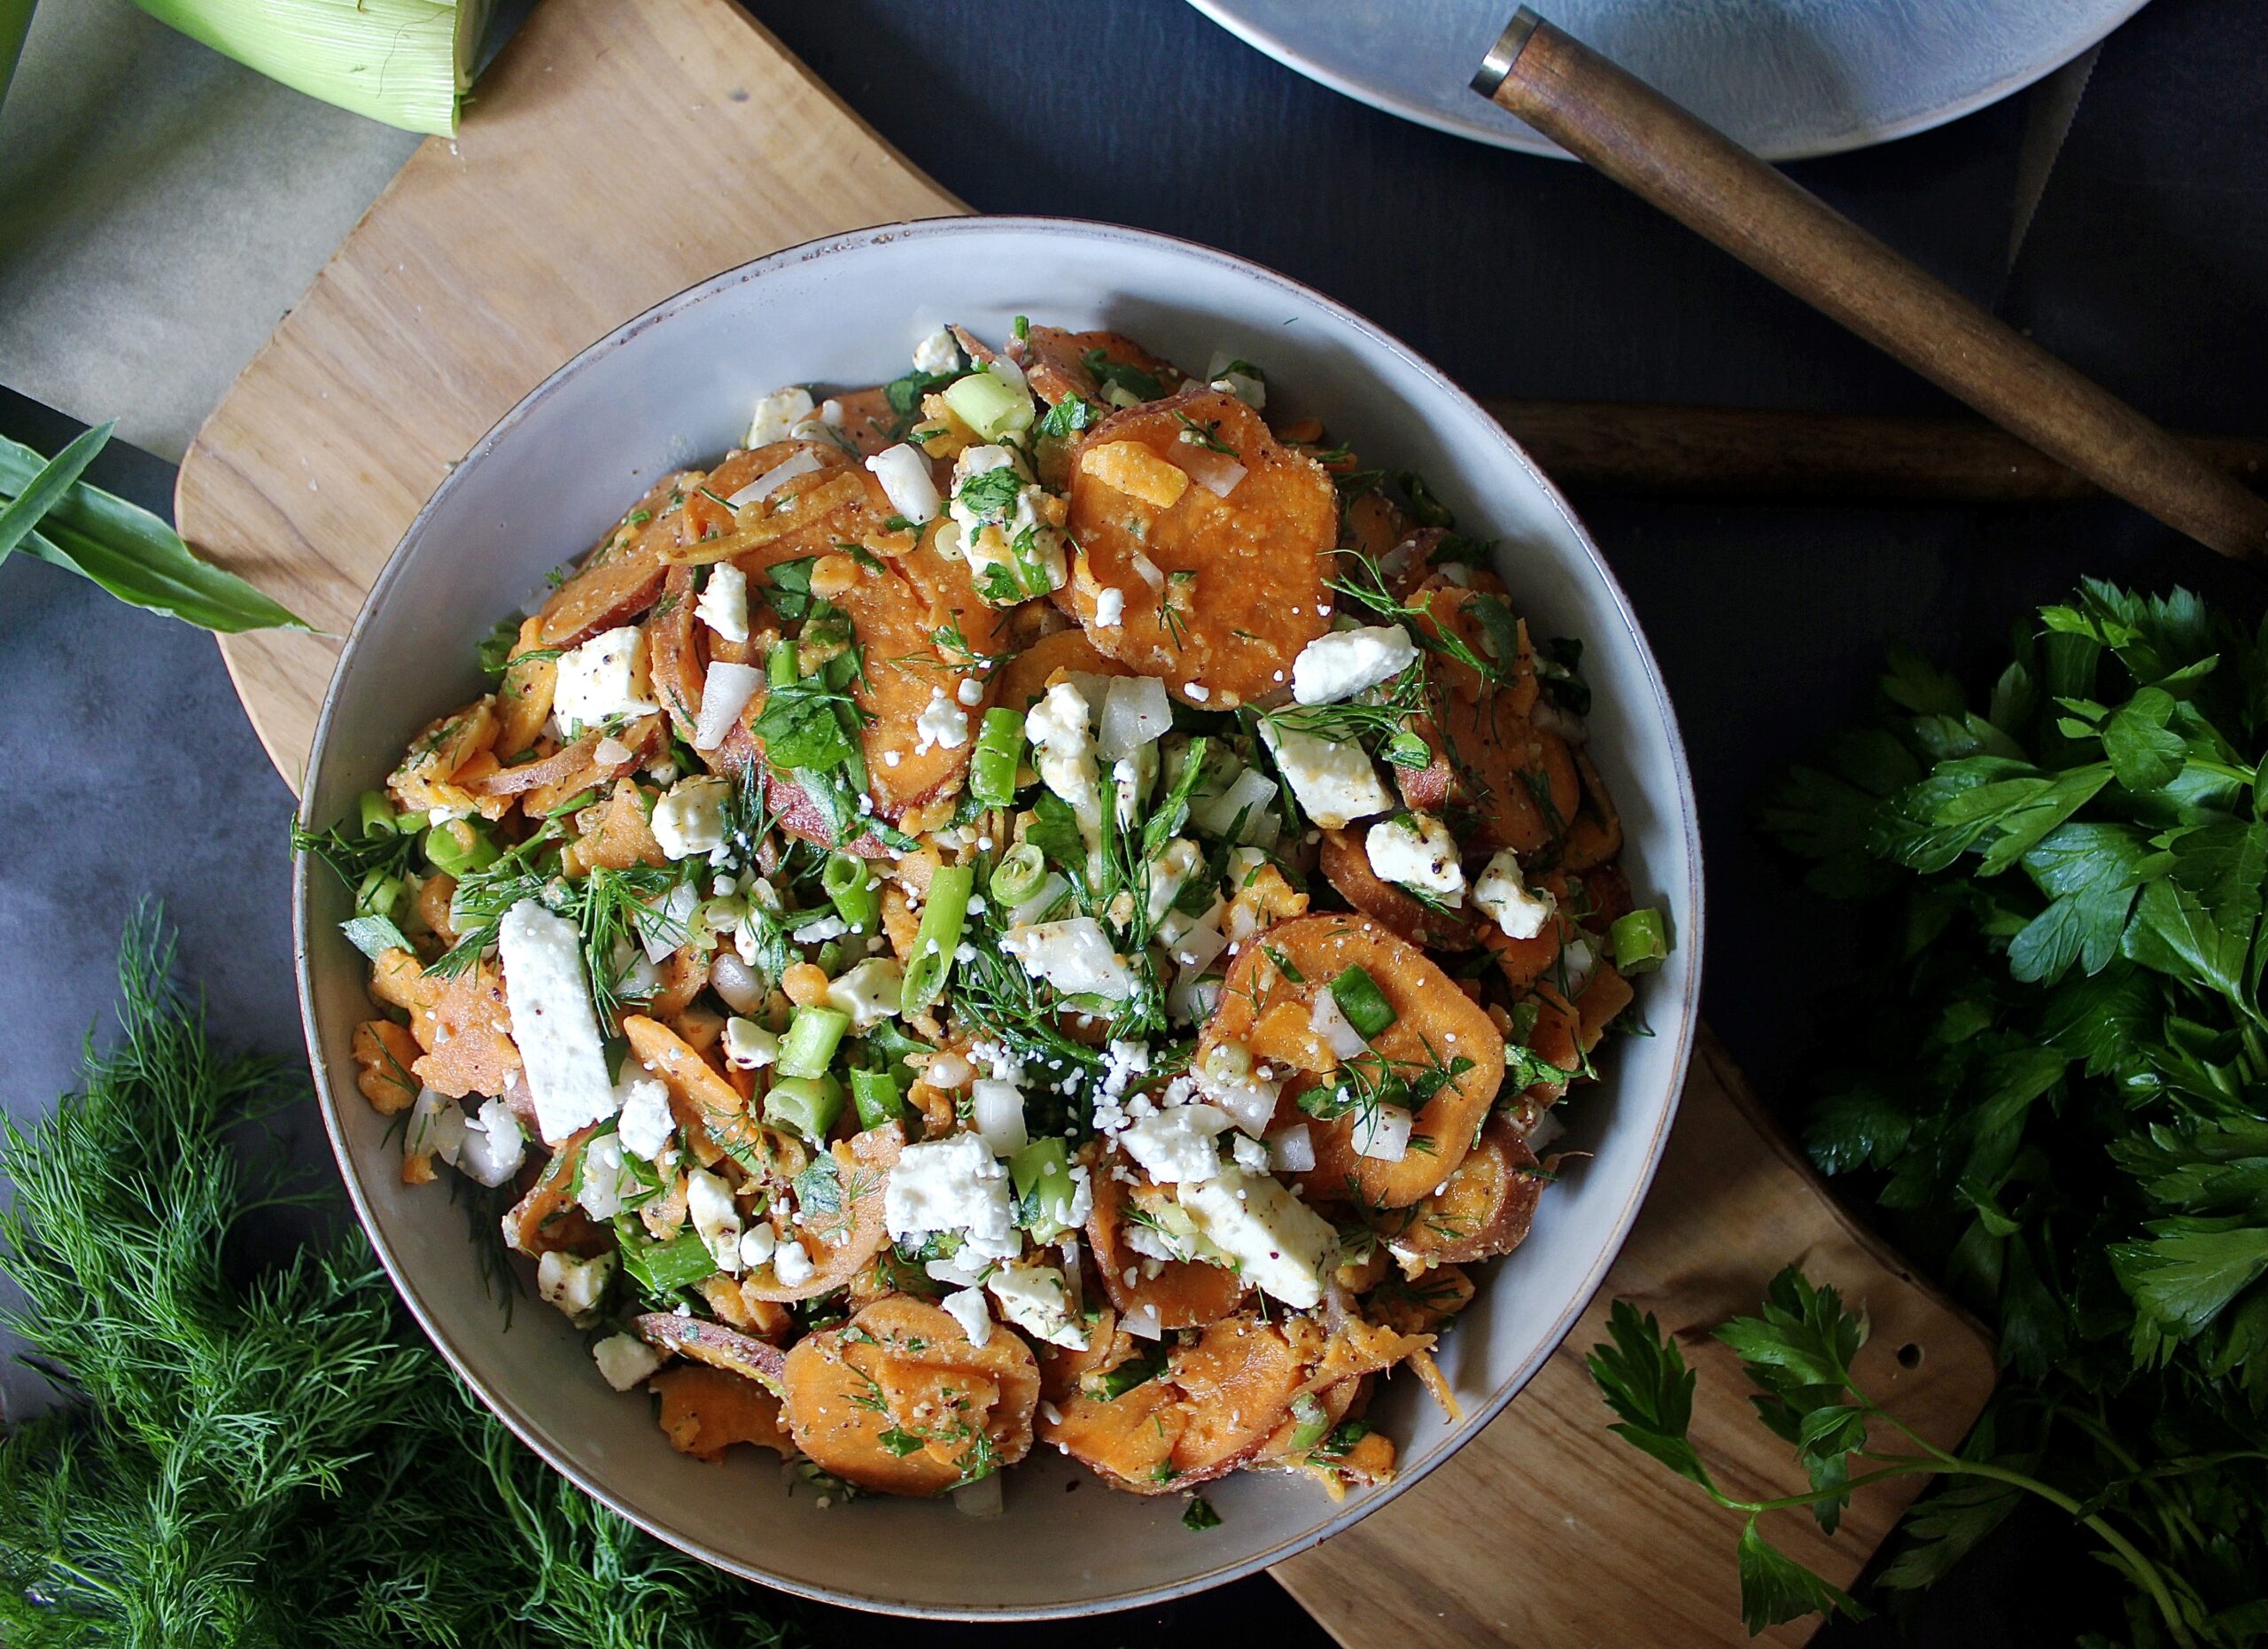 Sliced sweet potatoes and all the good Mediterranean flavors tossed in a simple Dijon vinaigrette: this Greek Style Dijon Sweet Potato Salad really has it all!!